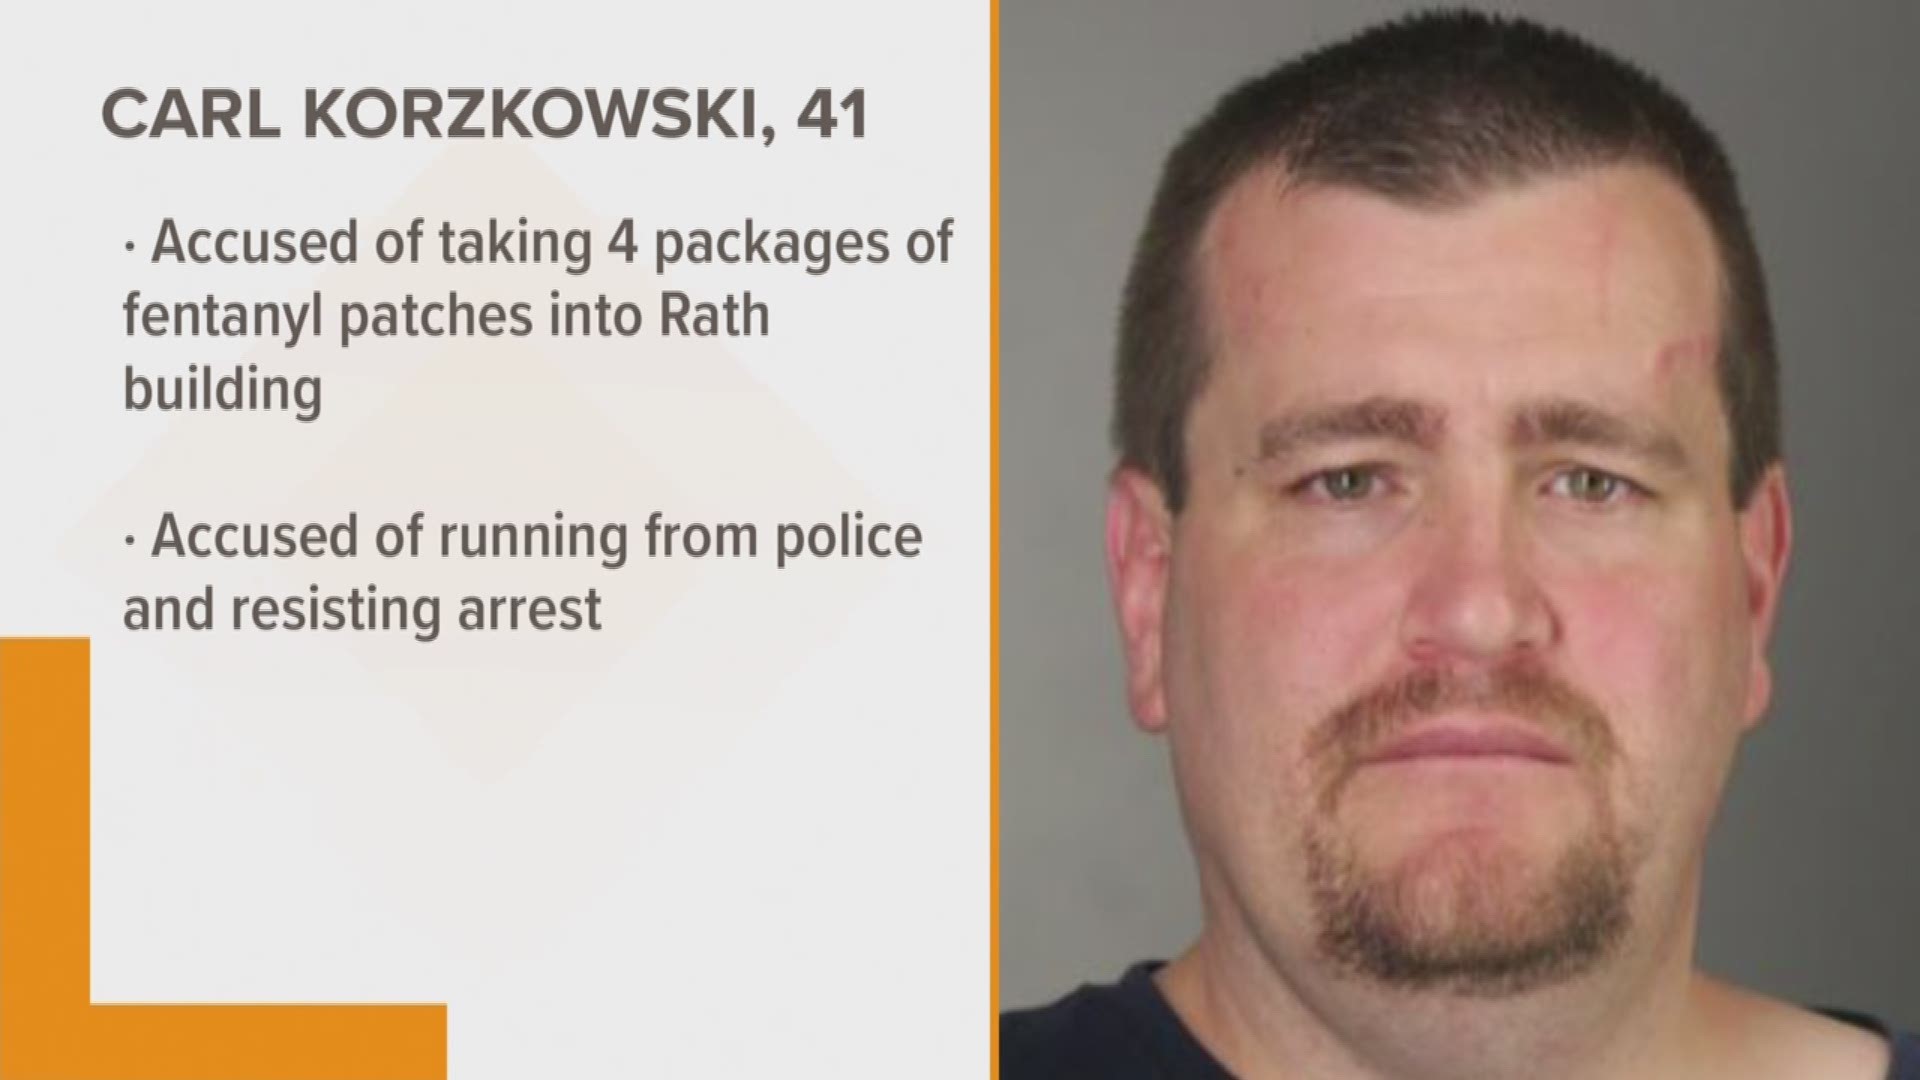 -- ACCUSED OF TRYING TO BRING FENTANYL INTO THE COUNTY BUILDING.
SHERIFF'S DEPUTIES SAY 41-YEAR-OLD CARL KORZKOWSKI HAD FOUR Packages OF FENTANYL